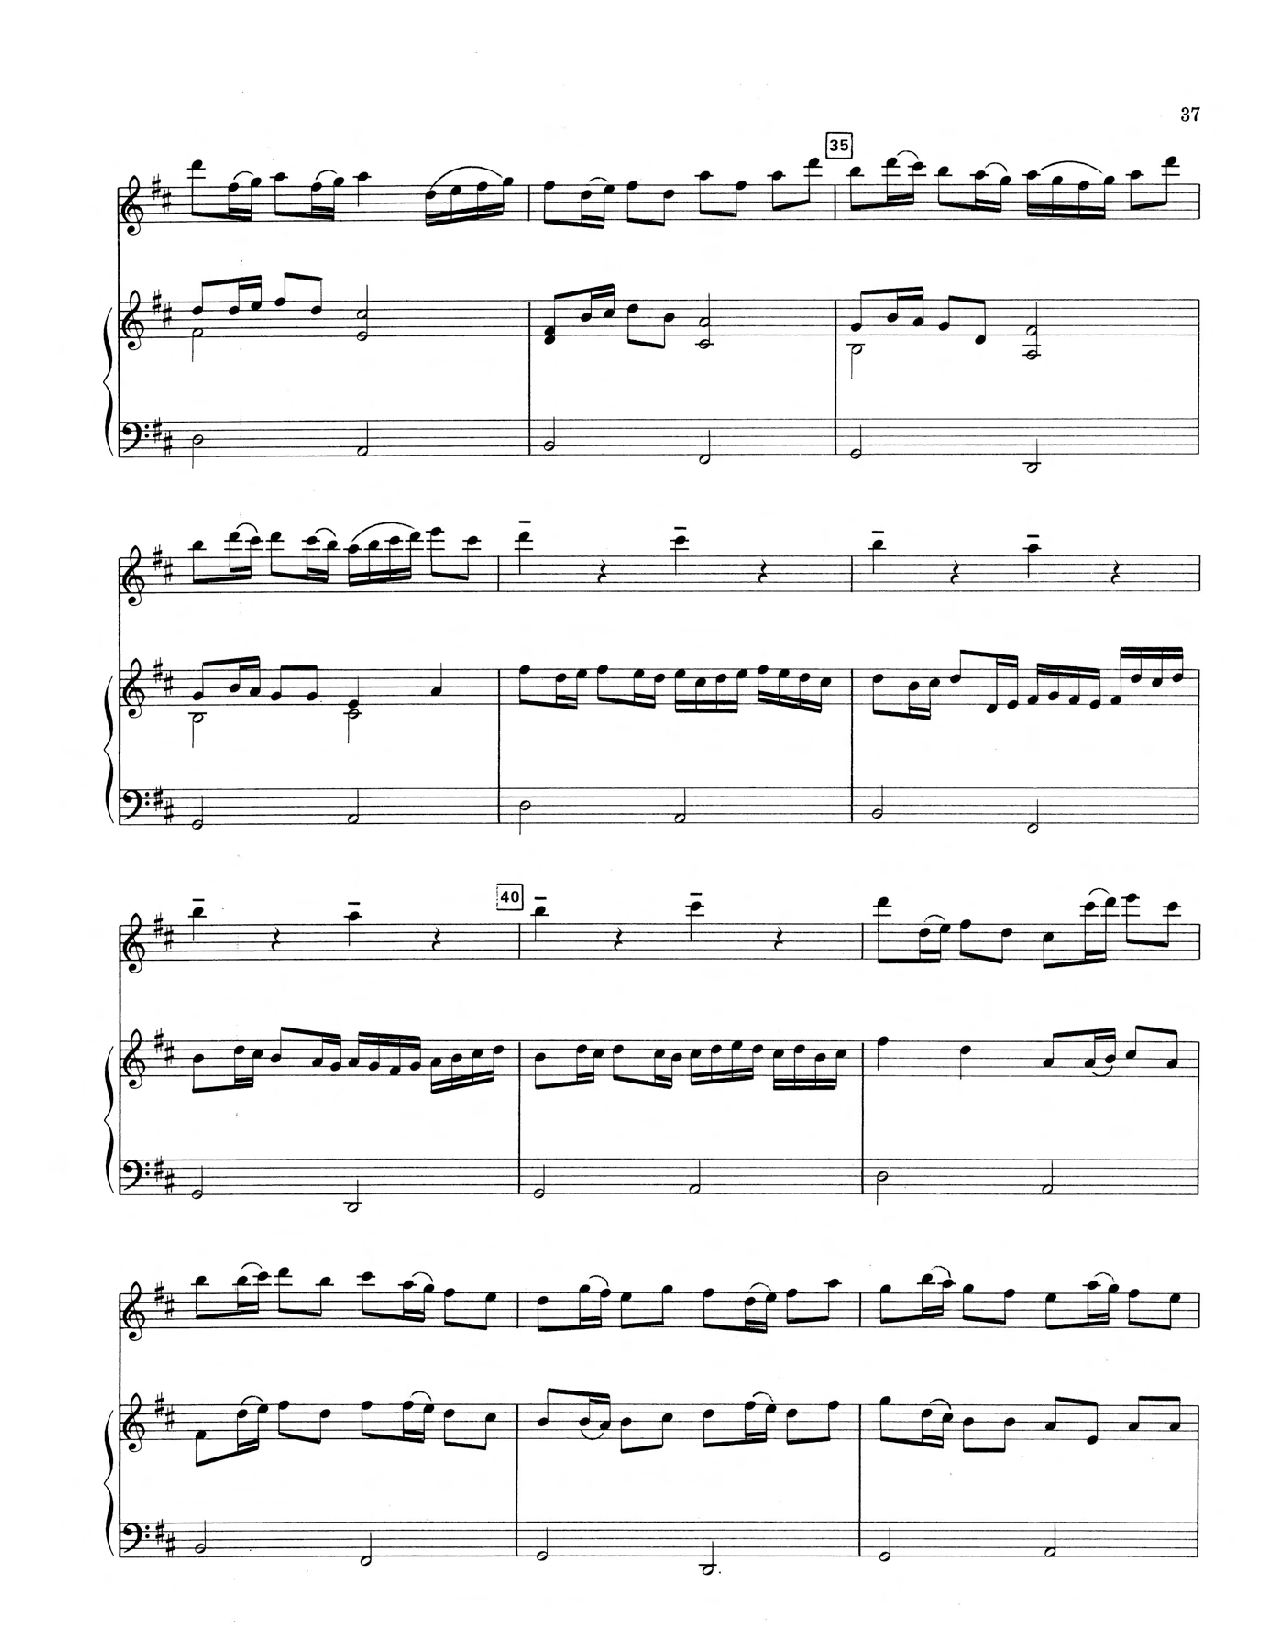 CLASSIC SOLOS FOR FLUTE AND KEYBOARD